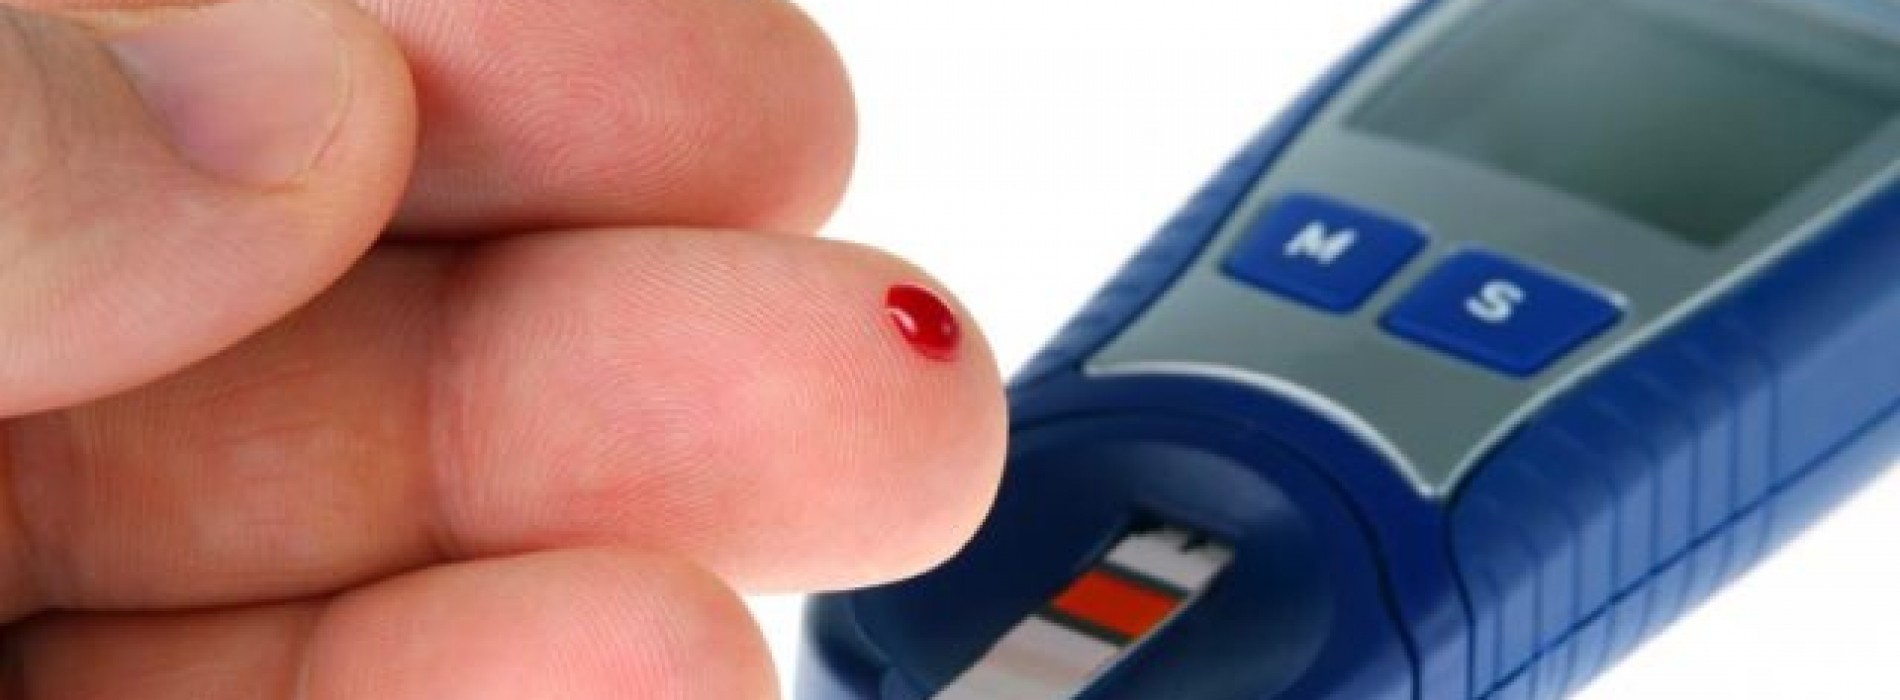 WHO out with first global report on diabetes